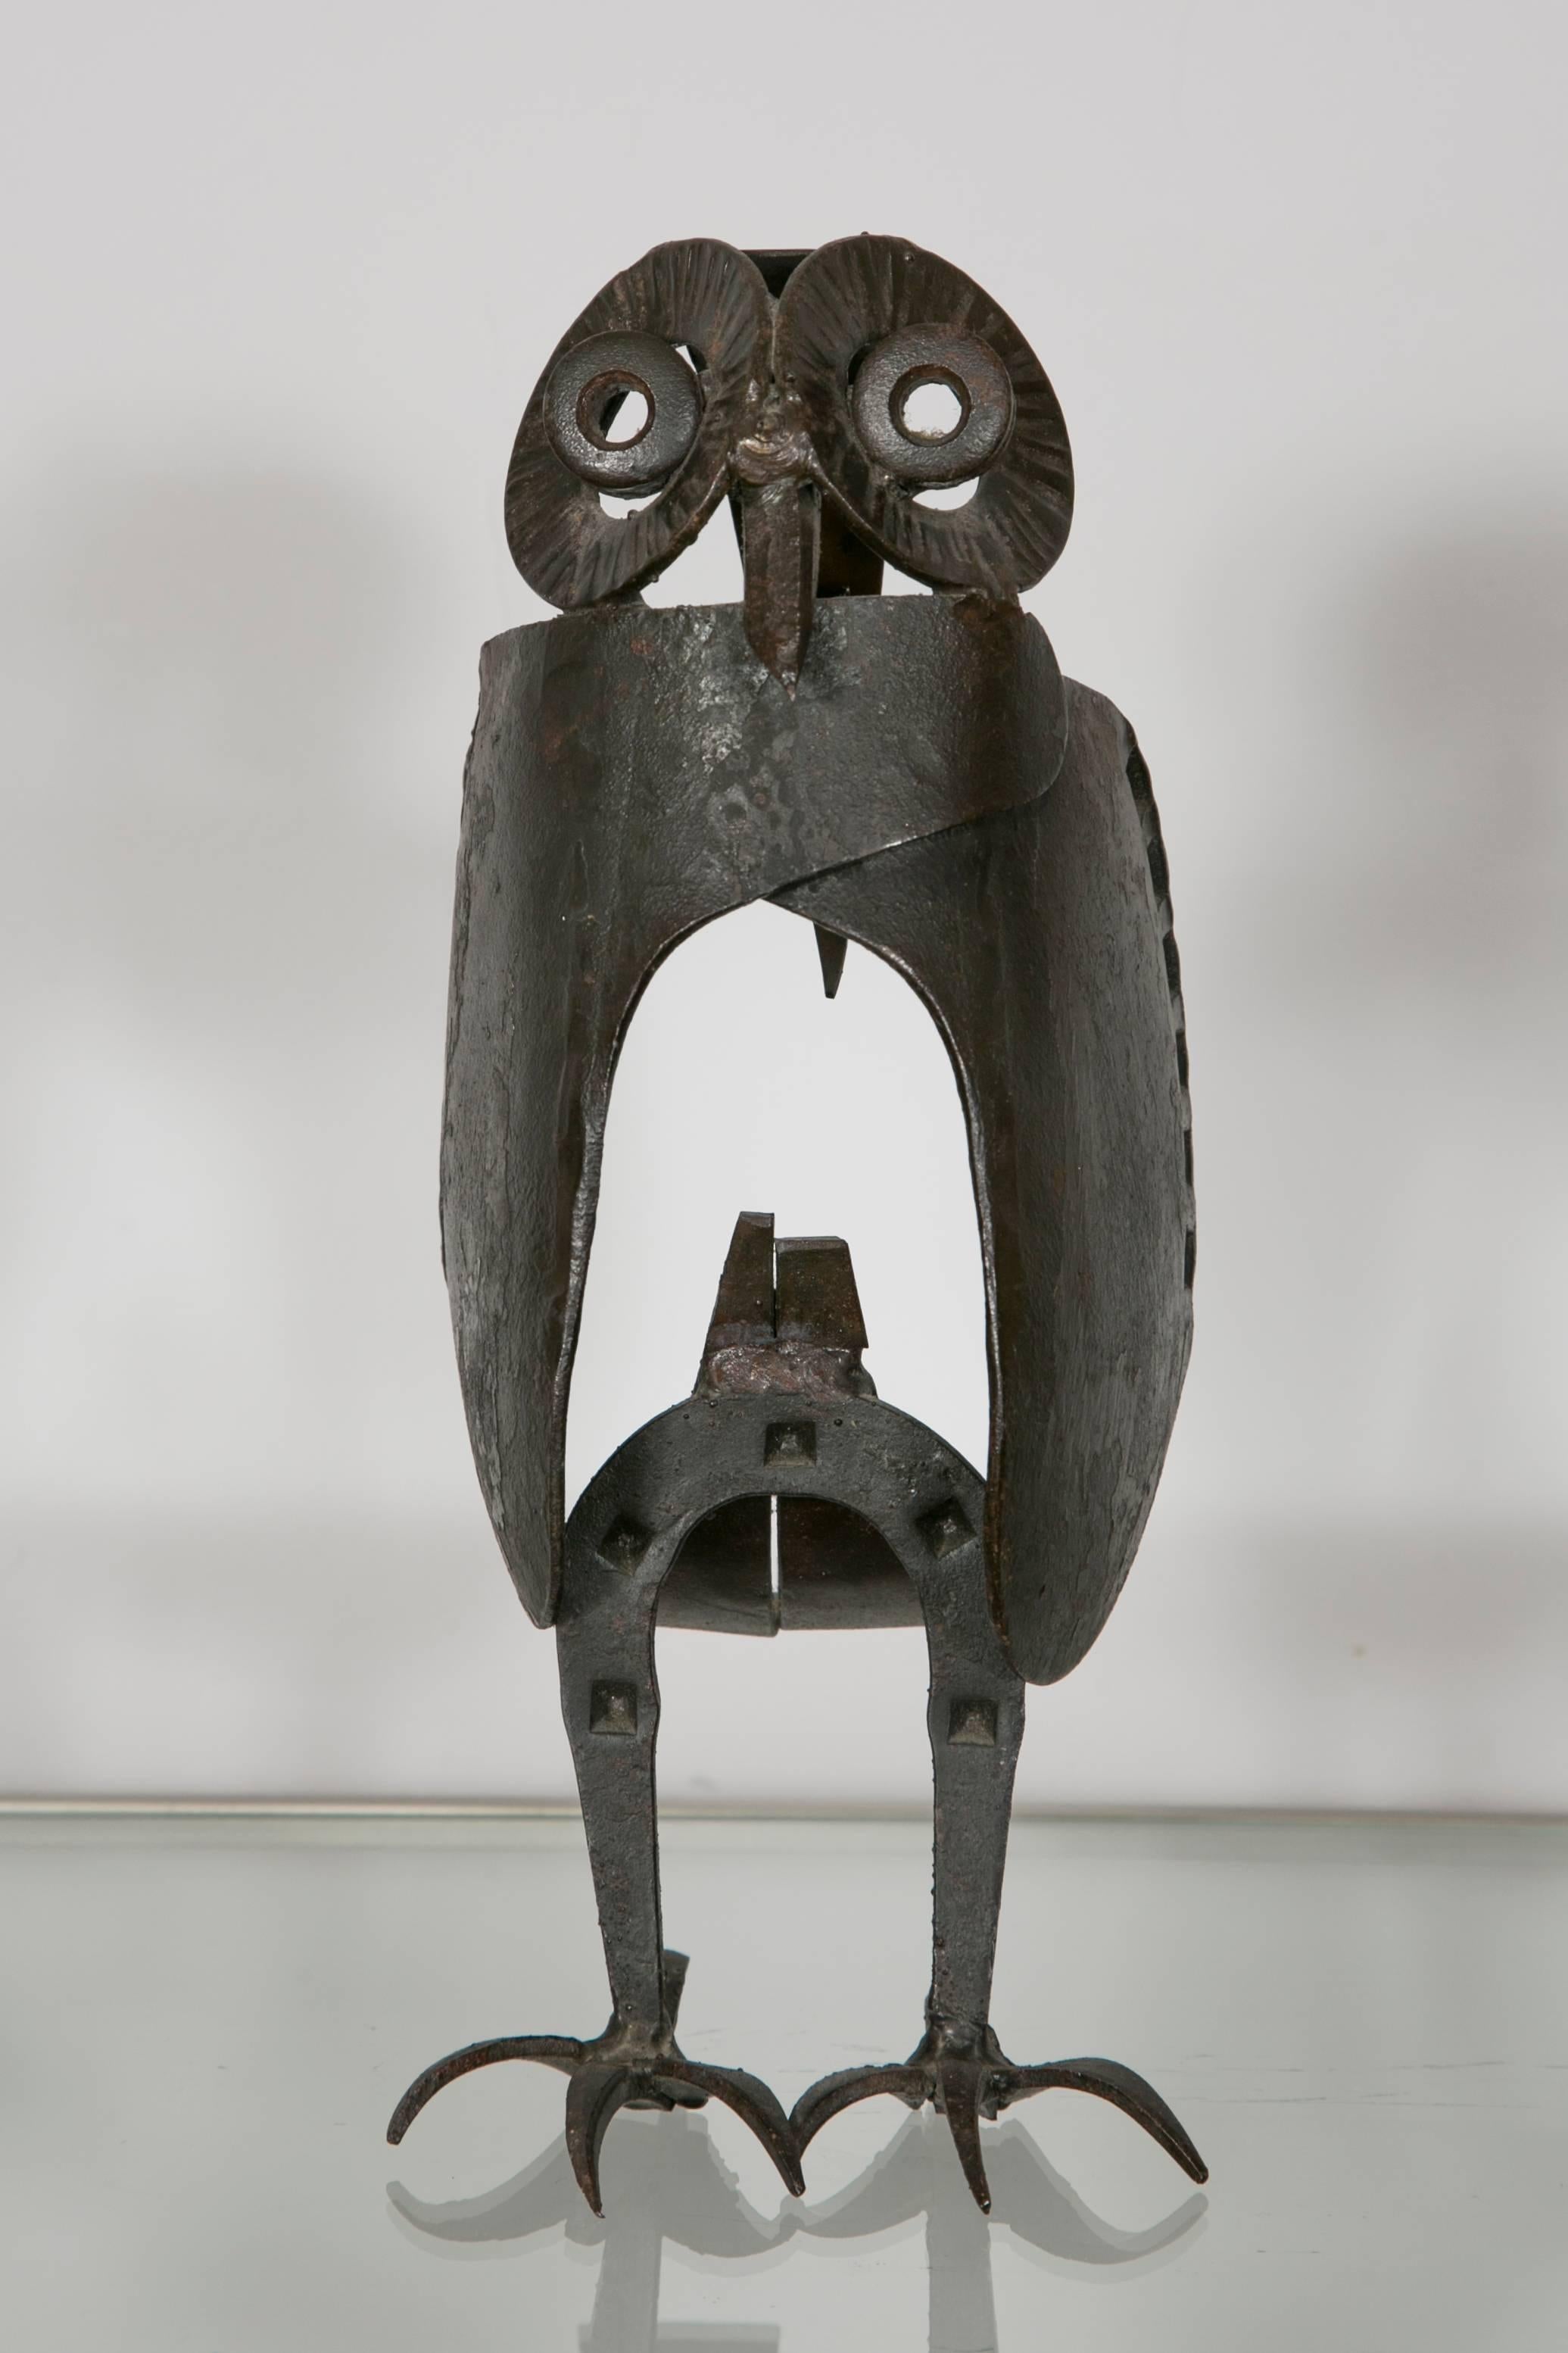 A wrought iron sculpture of an owl made in recycled iron tools or objects (like horse shoes, nails etc...).
Signed by artist initials: M.L.
France, circa 1960.